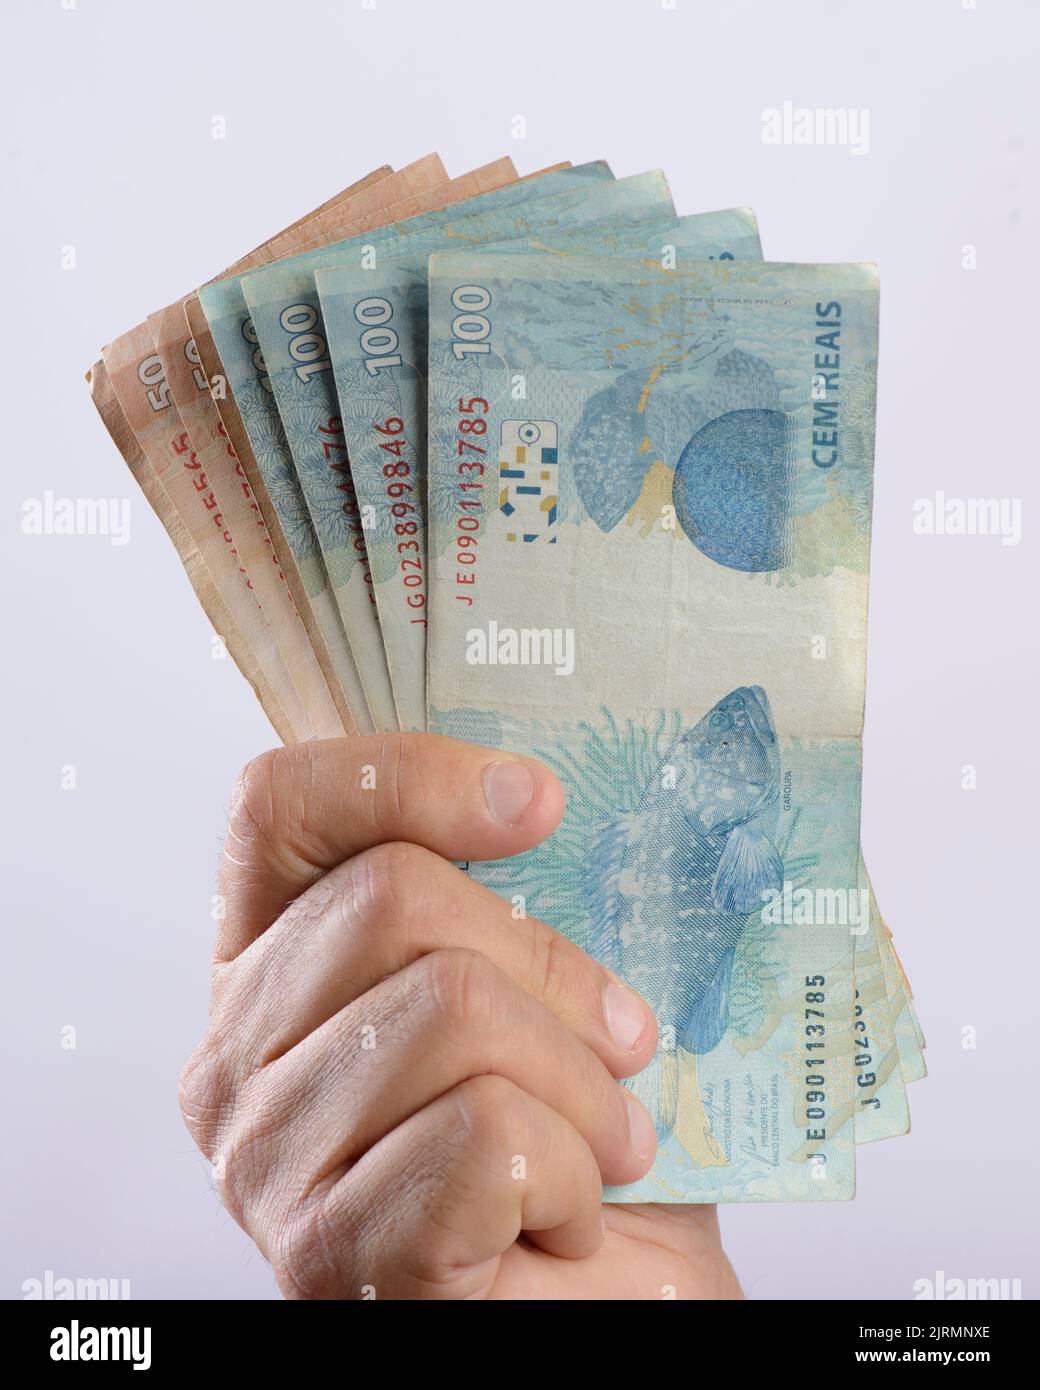 Hand holding money, six hundred reais, Brazilian currency, on white background. Stock Photo